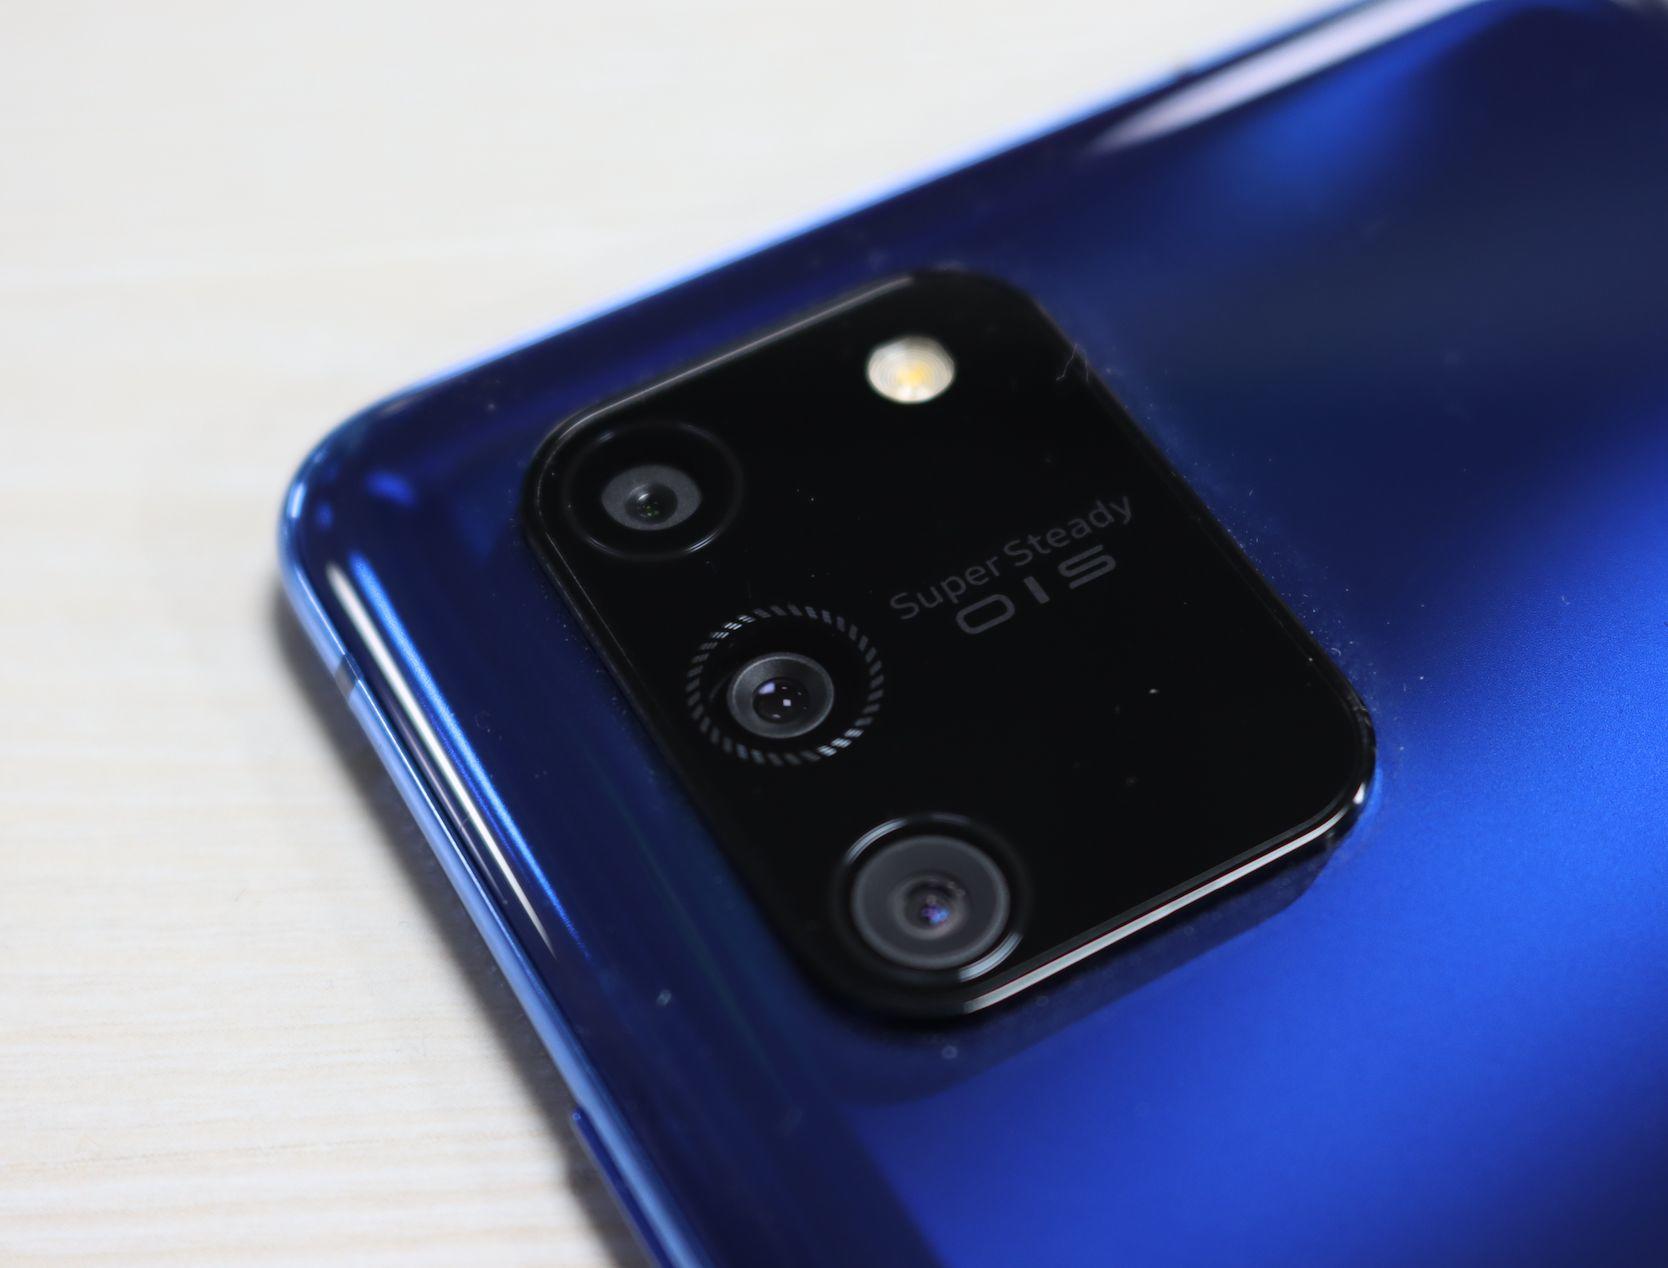 Samsung S10 Lite comes with a 48MP triple-lens camera setup at the back